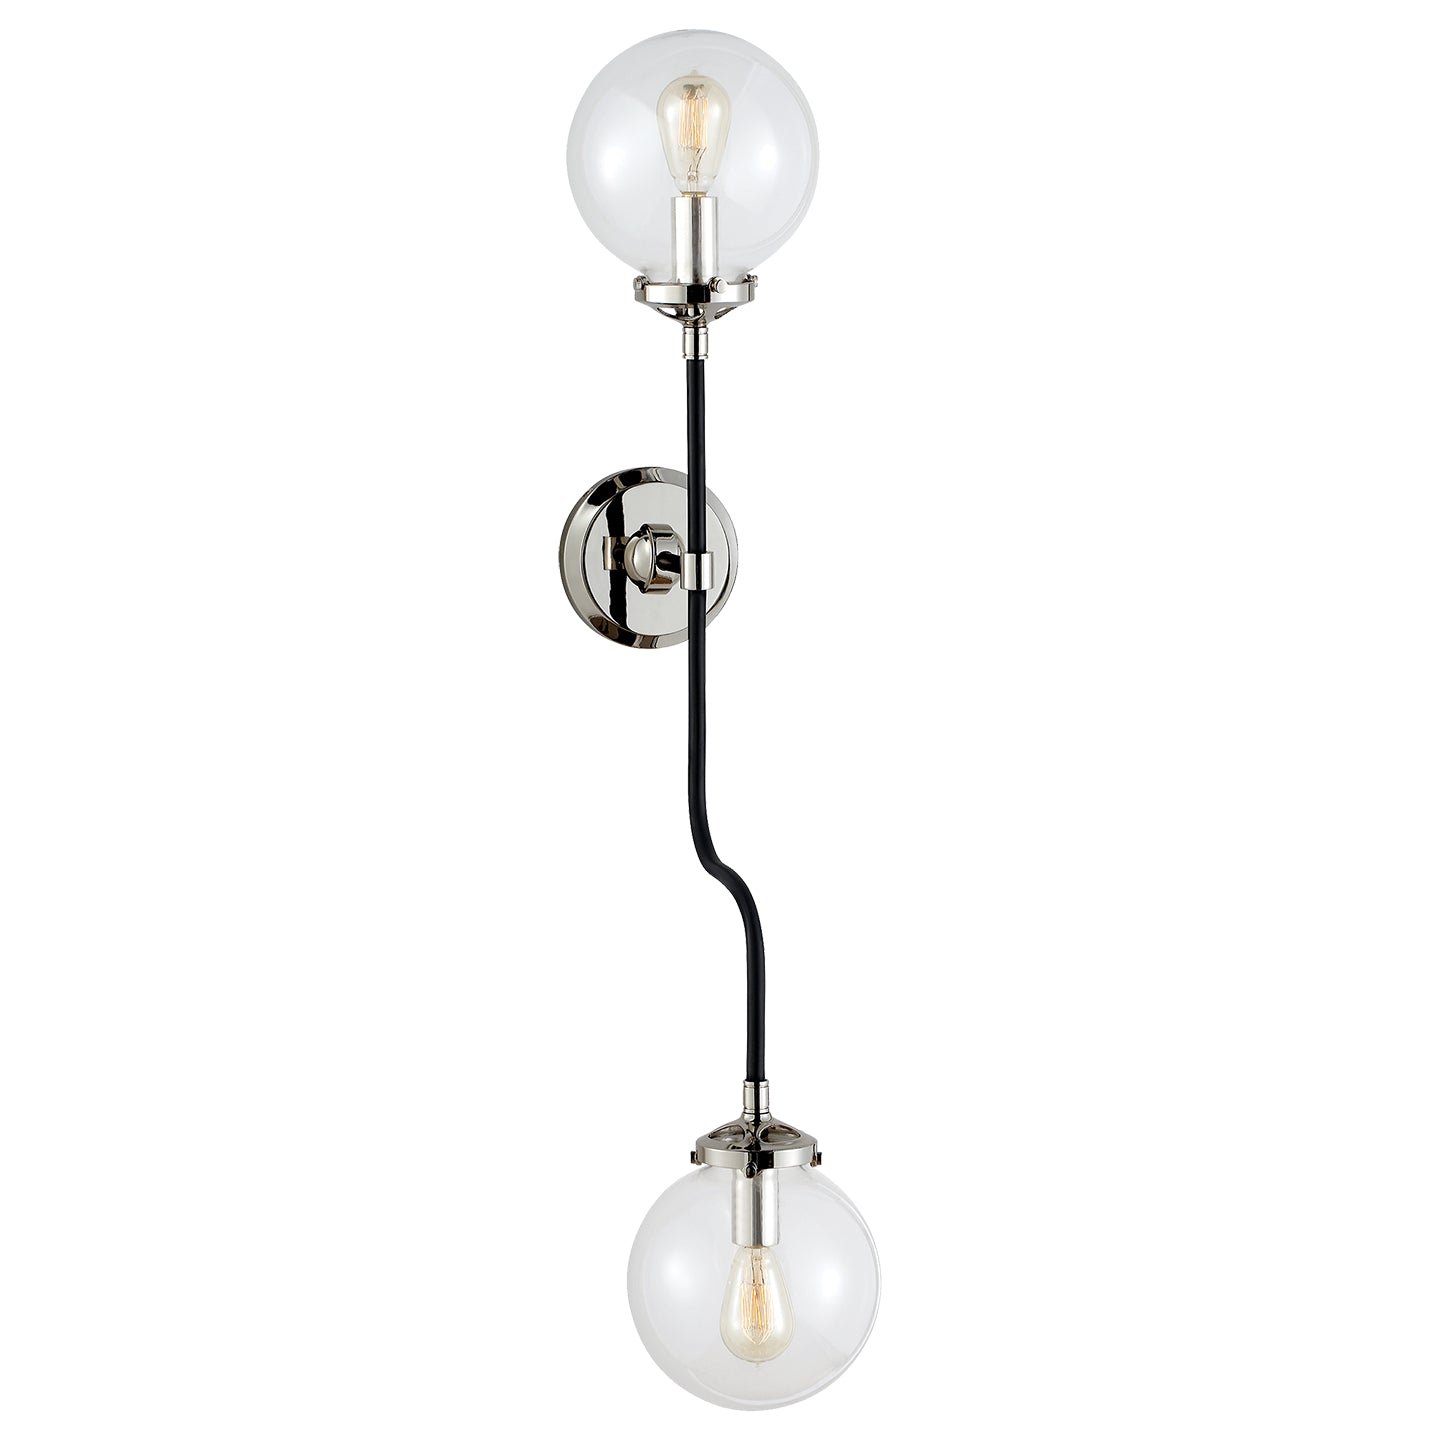 Visual Comfort Signature - S 2022PN-CG - Two Light Wall Sconce - bistro - Polished Nickel